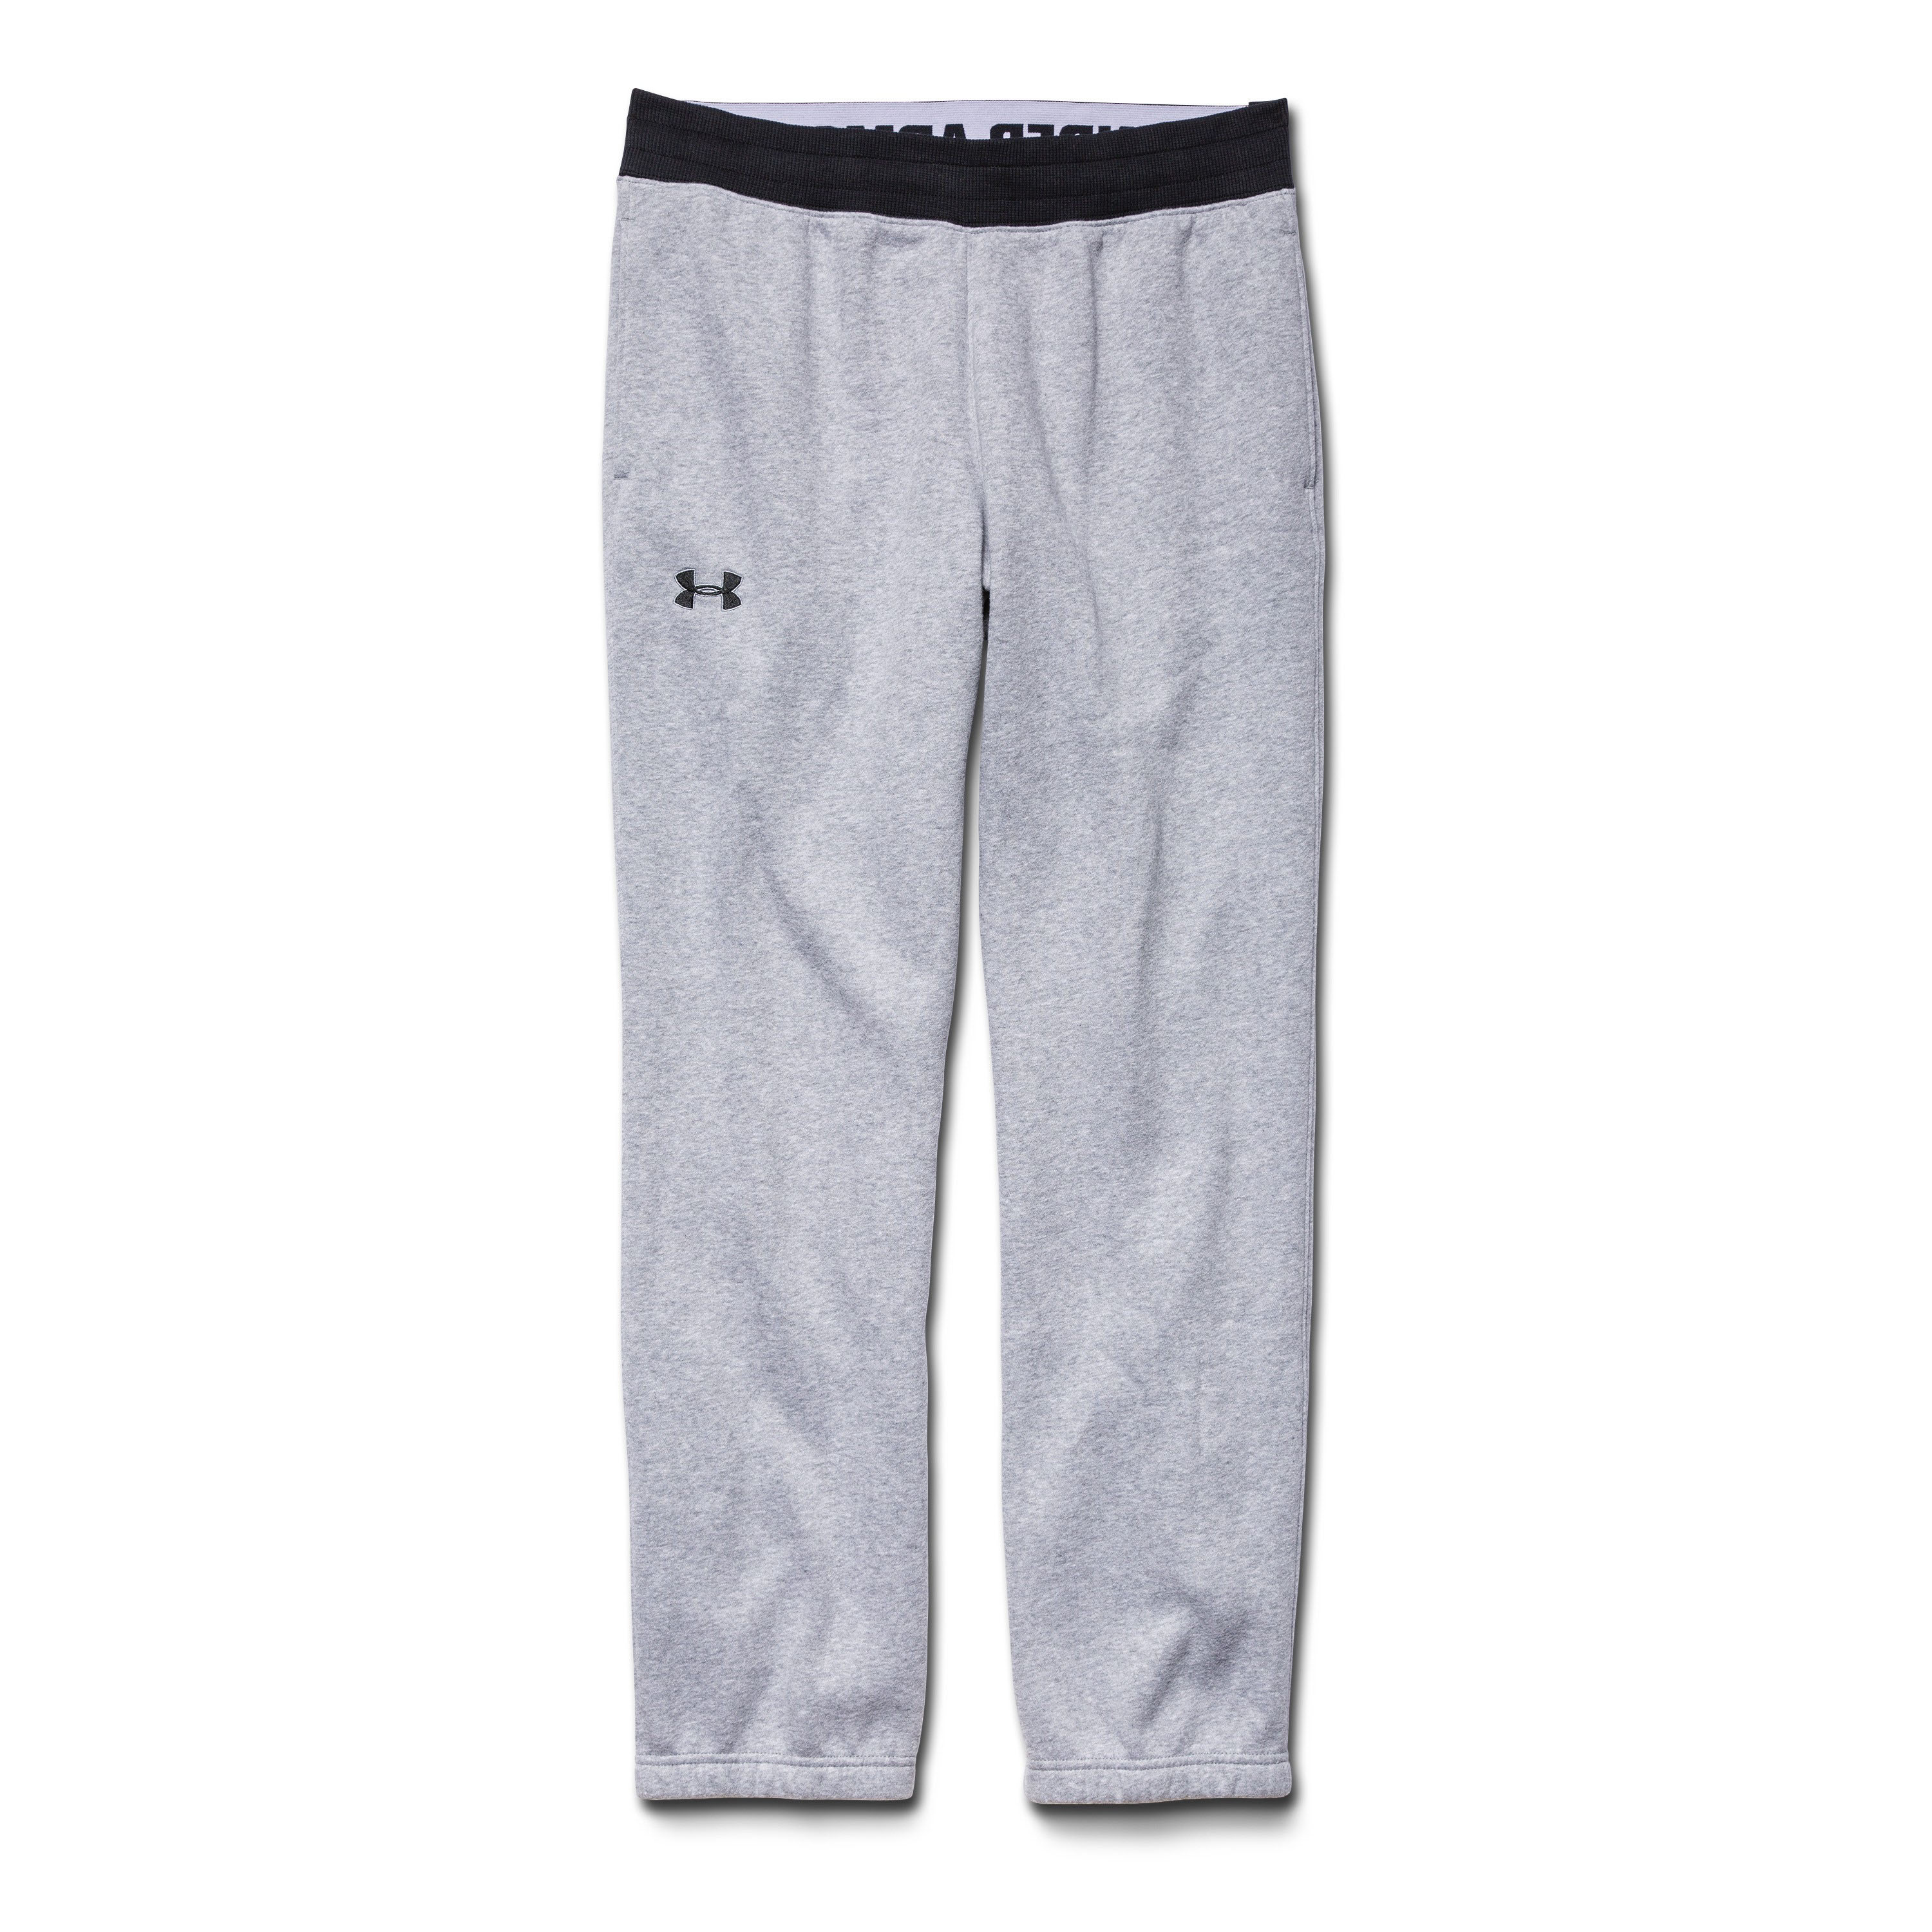 Under Armour Storm Cotton Cuffed Pants gray | Under Armour Storm Cotton ...